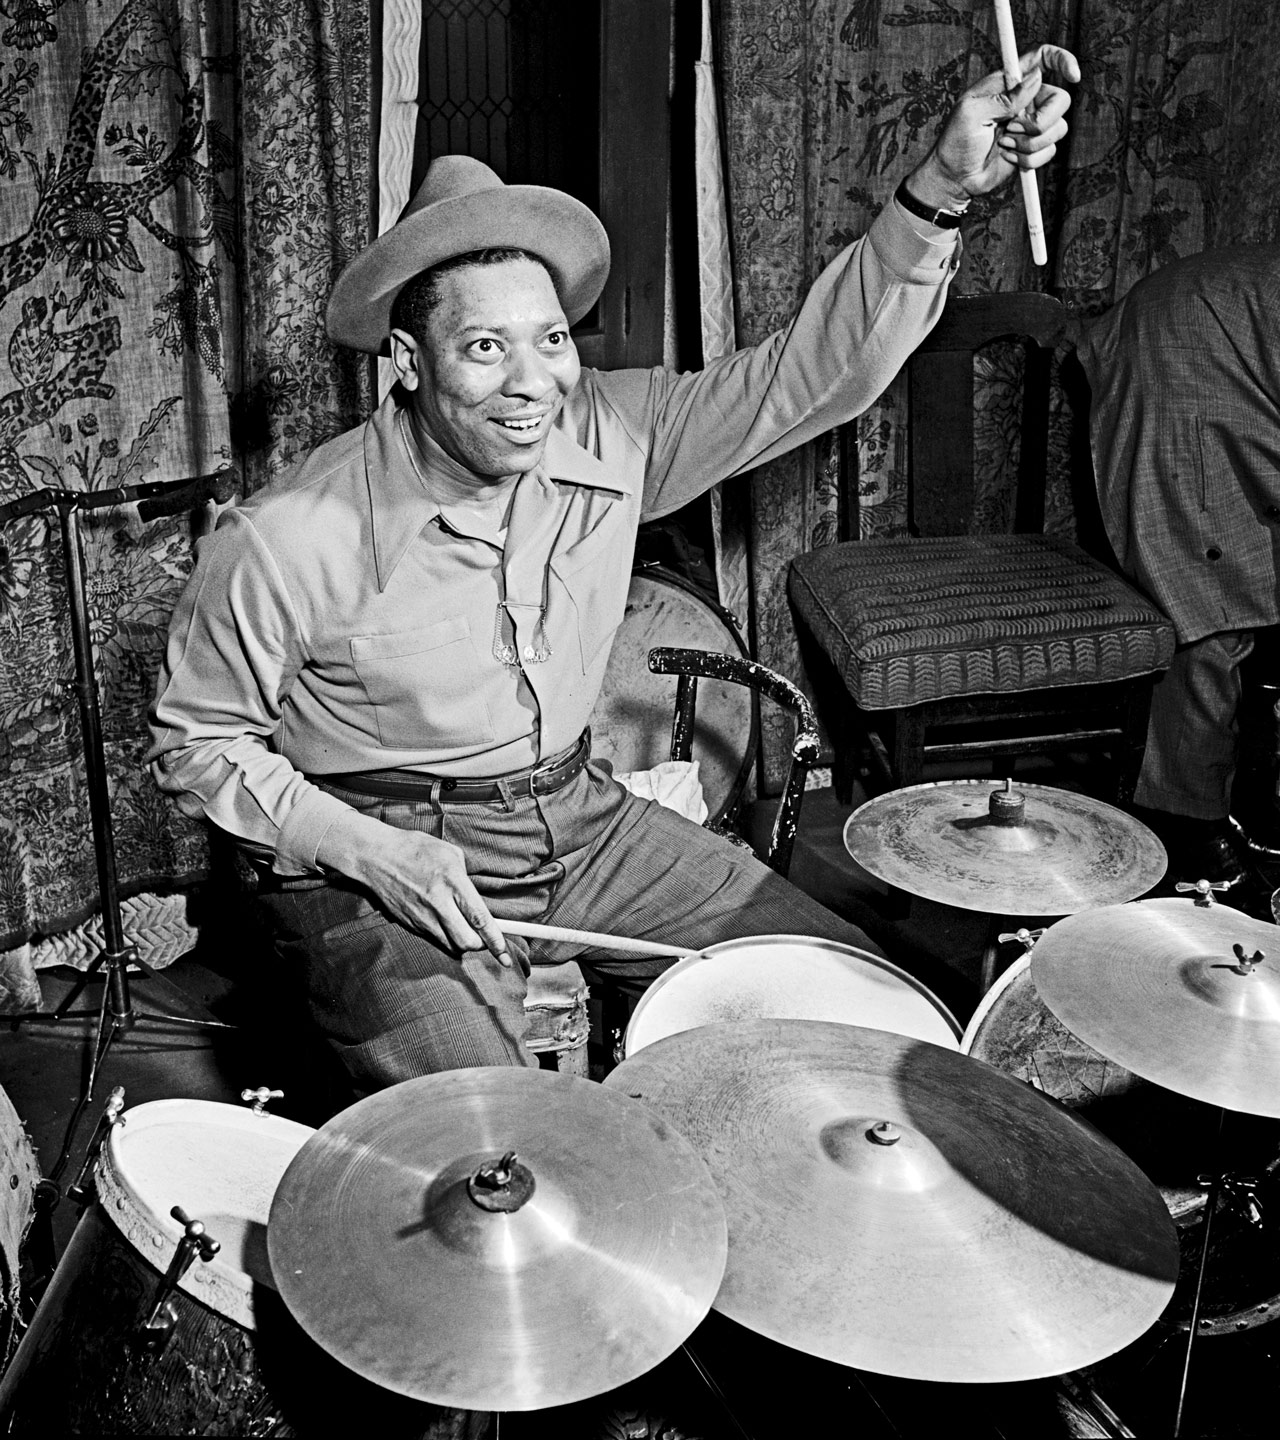 [Portrait of Sid Catlett, New York, N.Y., ca. Mar. 1947] — Caption from Down Beat: [from article] The shot of exuberant Sidney Catlett (who had just caught a flying drumstick) was taken during one of Louis Armstrong's last rehearsals before his Carnegie Hall concert. Can't report on Louis' recital since the Great One had not; at this writing, appeared. By the way, has it ever occurred to you, too, that Big Sid, whether at or away from his drums, gives an unsurpassed impression of tremendous physical power?